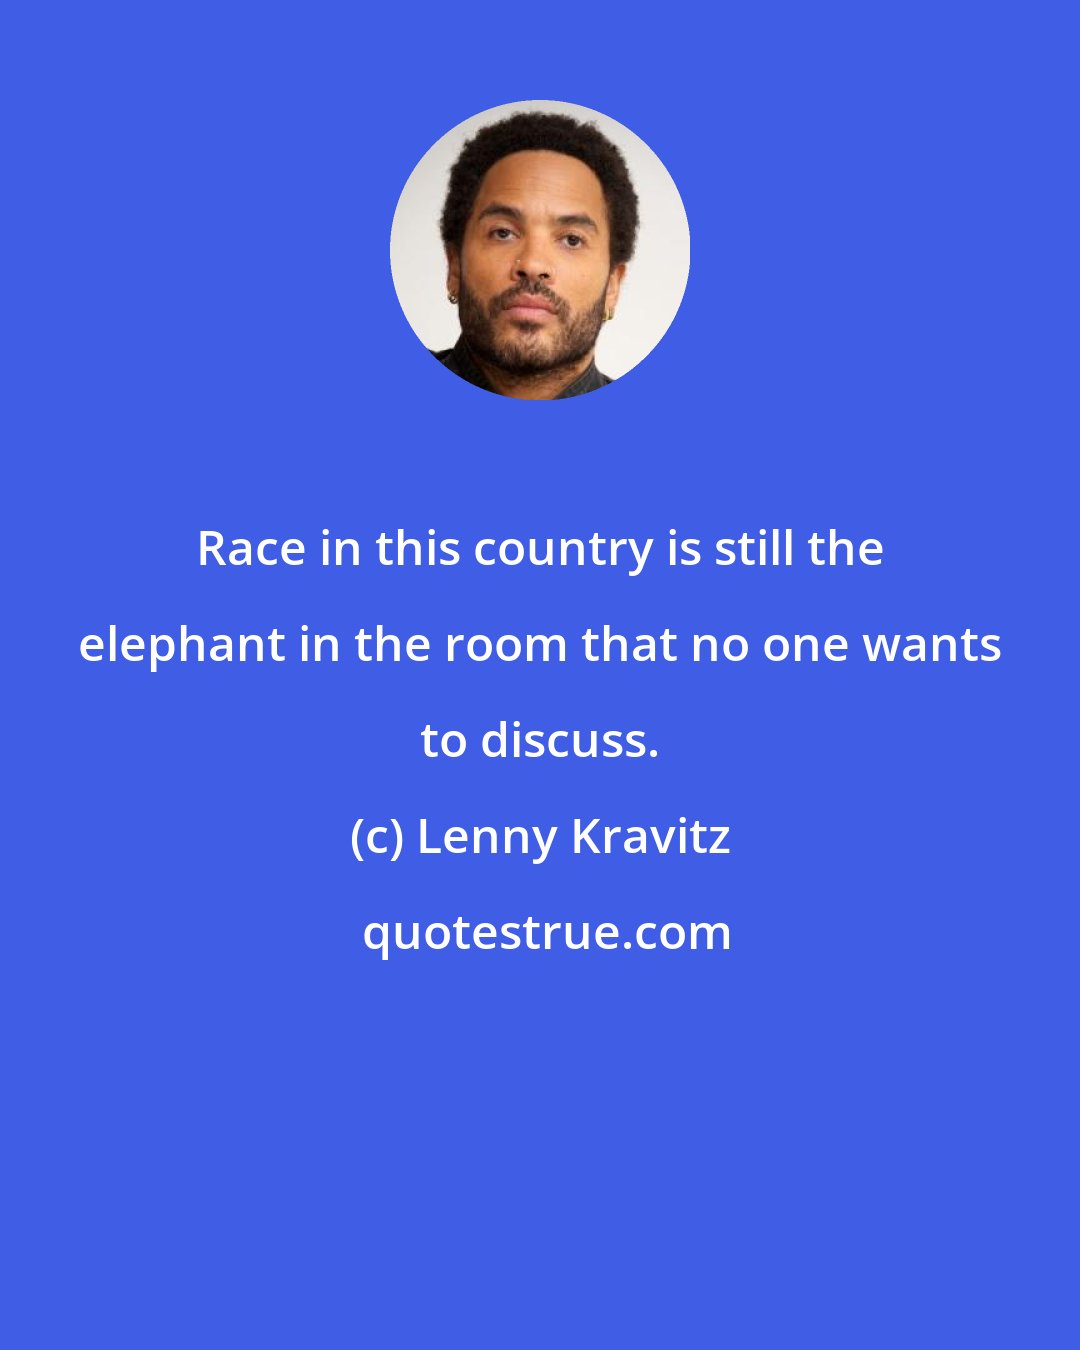 Lenny Kravitz: Race in this country is still the elephant in the room that no one wants to discuss.